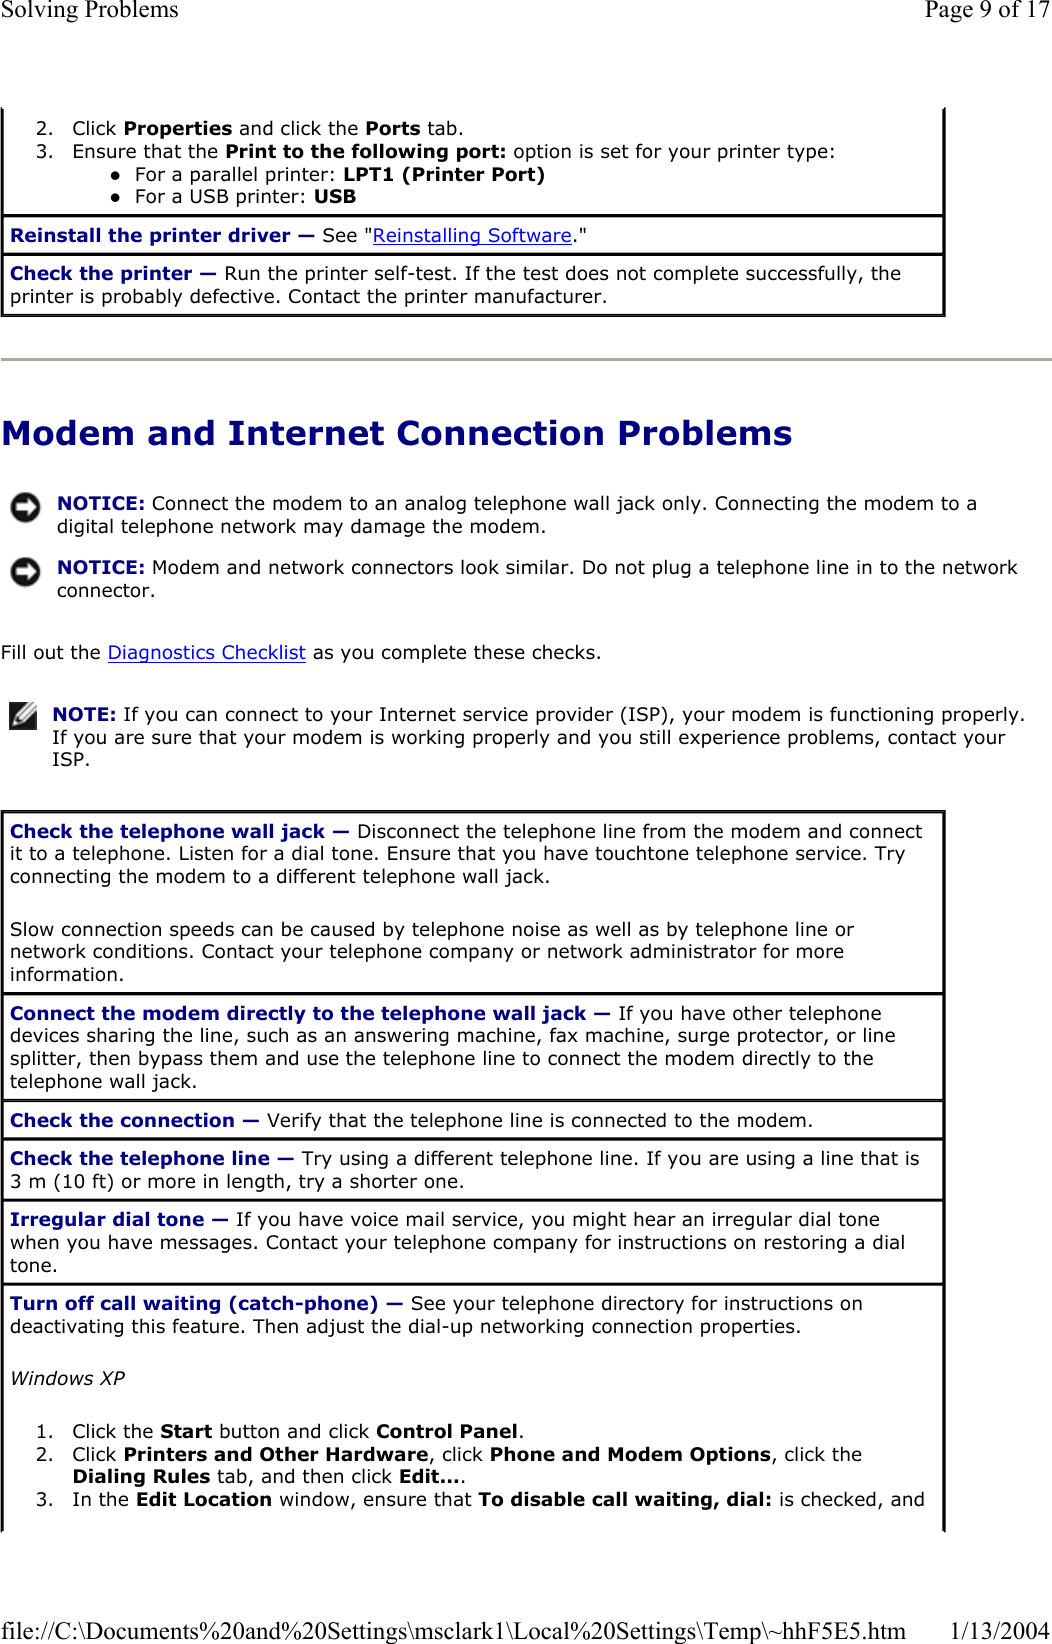 Modem and Internet Connection Problems Fill out the Diagnostics Checklist as you complete these checks. 2. Click Properties and click the Ports tab.  3. Ensure that the Print to the following port: option is set for your printer type: zFor a parallel printer: LPT1 (Printer Port)zFor a USB printer: USBReinstall the printer driver — See &quot;Reinstalling Software.&quot; Check the printer — Run the printer self-test. If the test does not complete successfully, the printer is probably defective. Contact the printer manufacturer. NOTICE: Connect the modem to an analog telephone wall jack only. Connecting the modem to a digital telephone network may damage the modem.NOTICE: Modem and network connectors look similar. Do not plug a telephone line in to the network connector.NOTE: If you can connect to your Internet service provider (ISP), your modem is functioning properly. If you are sure that your modem is working properly and you still experience problems, contact your ISP.Check the telephone wall jack — Disconnect the telephone line from the modem and connect it to a telephone. Listen for a dial tone. Ensure that you have touchtone telephone service. Try connecting the modem to a different telephone wall jack. Slow connection speeds can be caused by telephone noise as well as by telephone line or network conditions. Contact your telephone company or network administrator for more information. Connect the modem directly to the telephone wall jack — If you have other telephone devices sharing the line, such as an answering machine, fax machine, surge protector, or line splitter, then bypass them and use the telephone line to connect the modem directly to the telephone wall jack. Check the connection — Verify that the telephone line is connected to the modem. Check the telephone line — Try using a different telephone line. If you are using a line that is 3 m (10 ft) or more in length, try a shorter one. Irregular dial tone — If you have voice mail service, you might hear an irregular dial tone when you have messages. Contact your telephone company for instructions on restoring a dial tone.Turn off call waiting (catch-phone) — See your telephone directory for instructions on deactivating this feature. Then adjust the dial-up networking connection properties. Windows XP1. Click the Start button and click Control Panel.2. Click Printers and Other Hardware, click Phone and Modem Options, click the Dialing Rules tab, and then click Edit....3. In the Edit Location window, ensure that To disable call waiting, dial: is checked, and Page 9 of 17Solving Problems1/13/2004file://C:\Documents%20and%20Settings\msclark1\Local%20Settings\Temp\~hhF5E5.htm